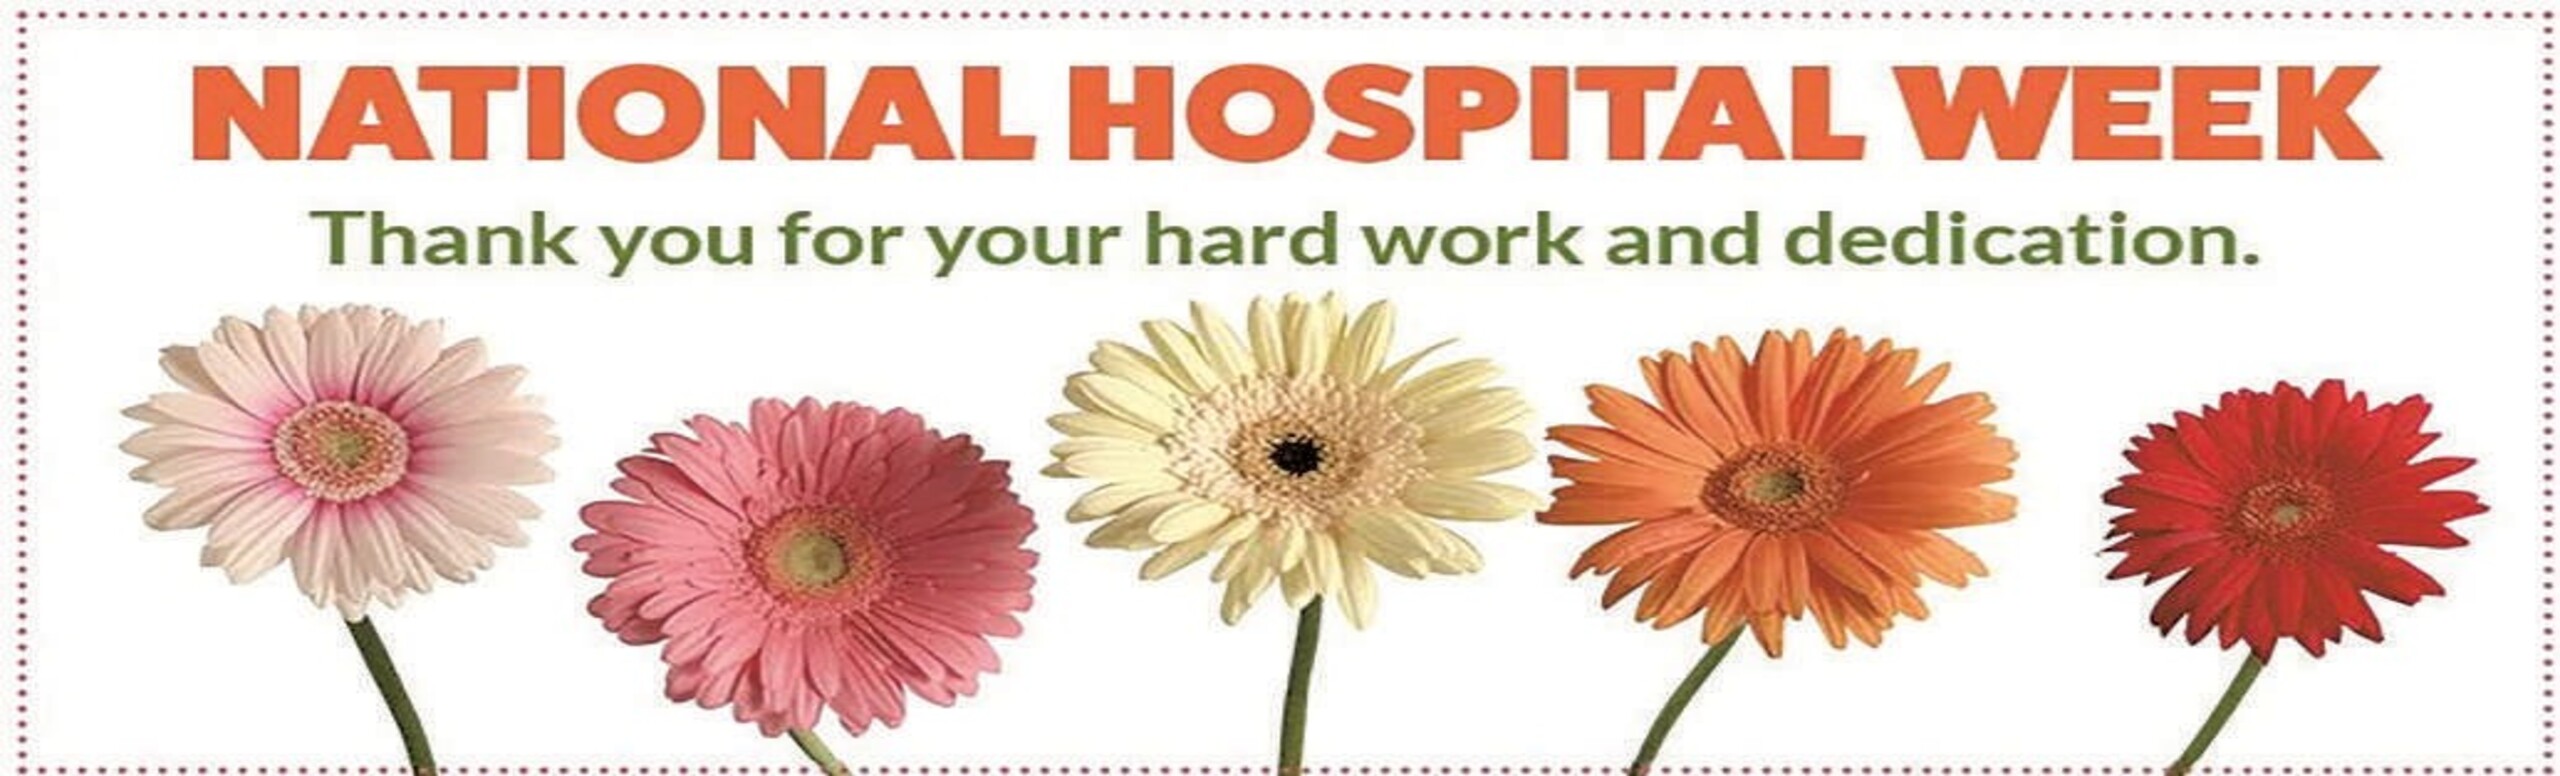 National Hospital Week with orange, cream and pink gerber daisys